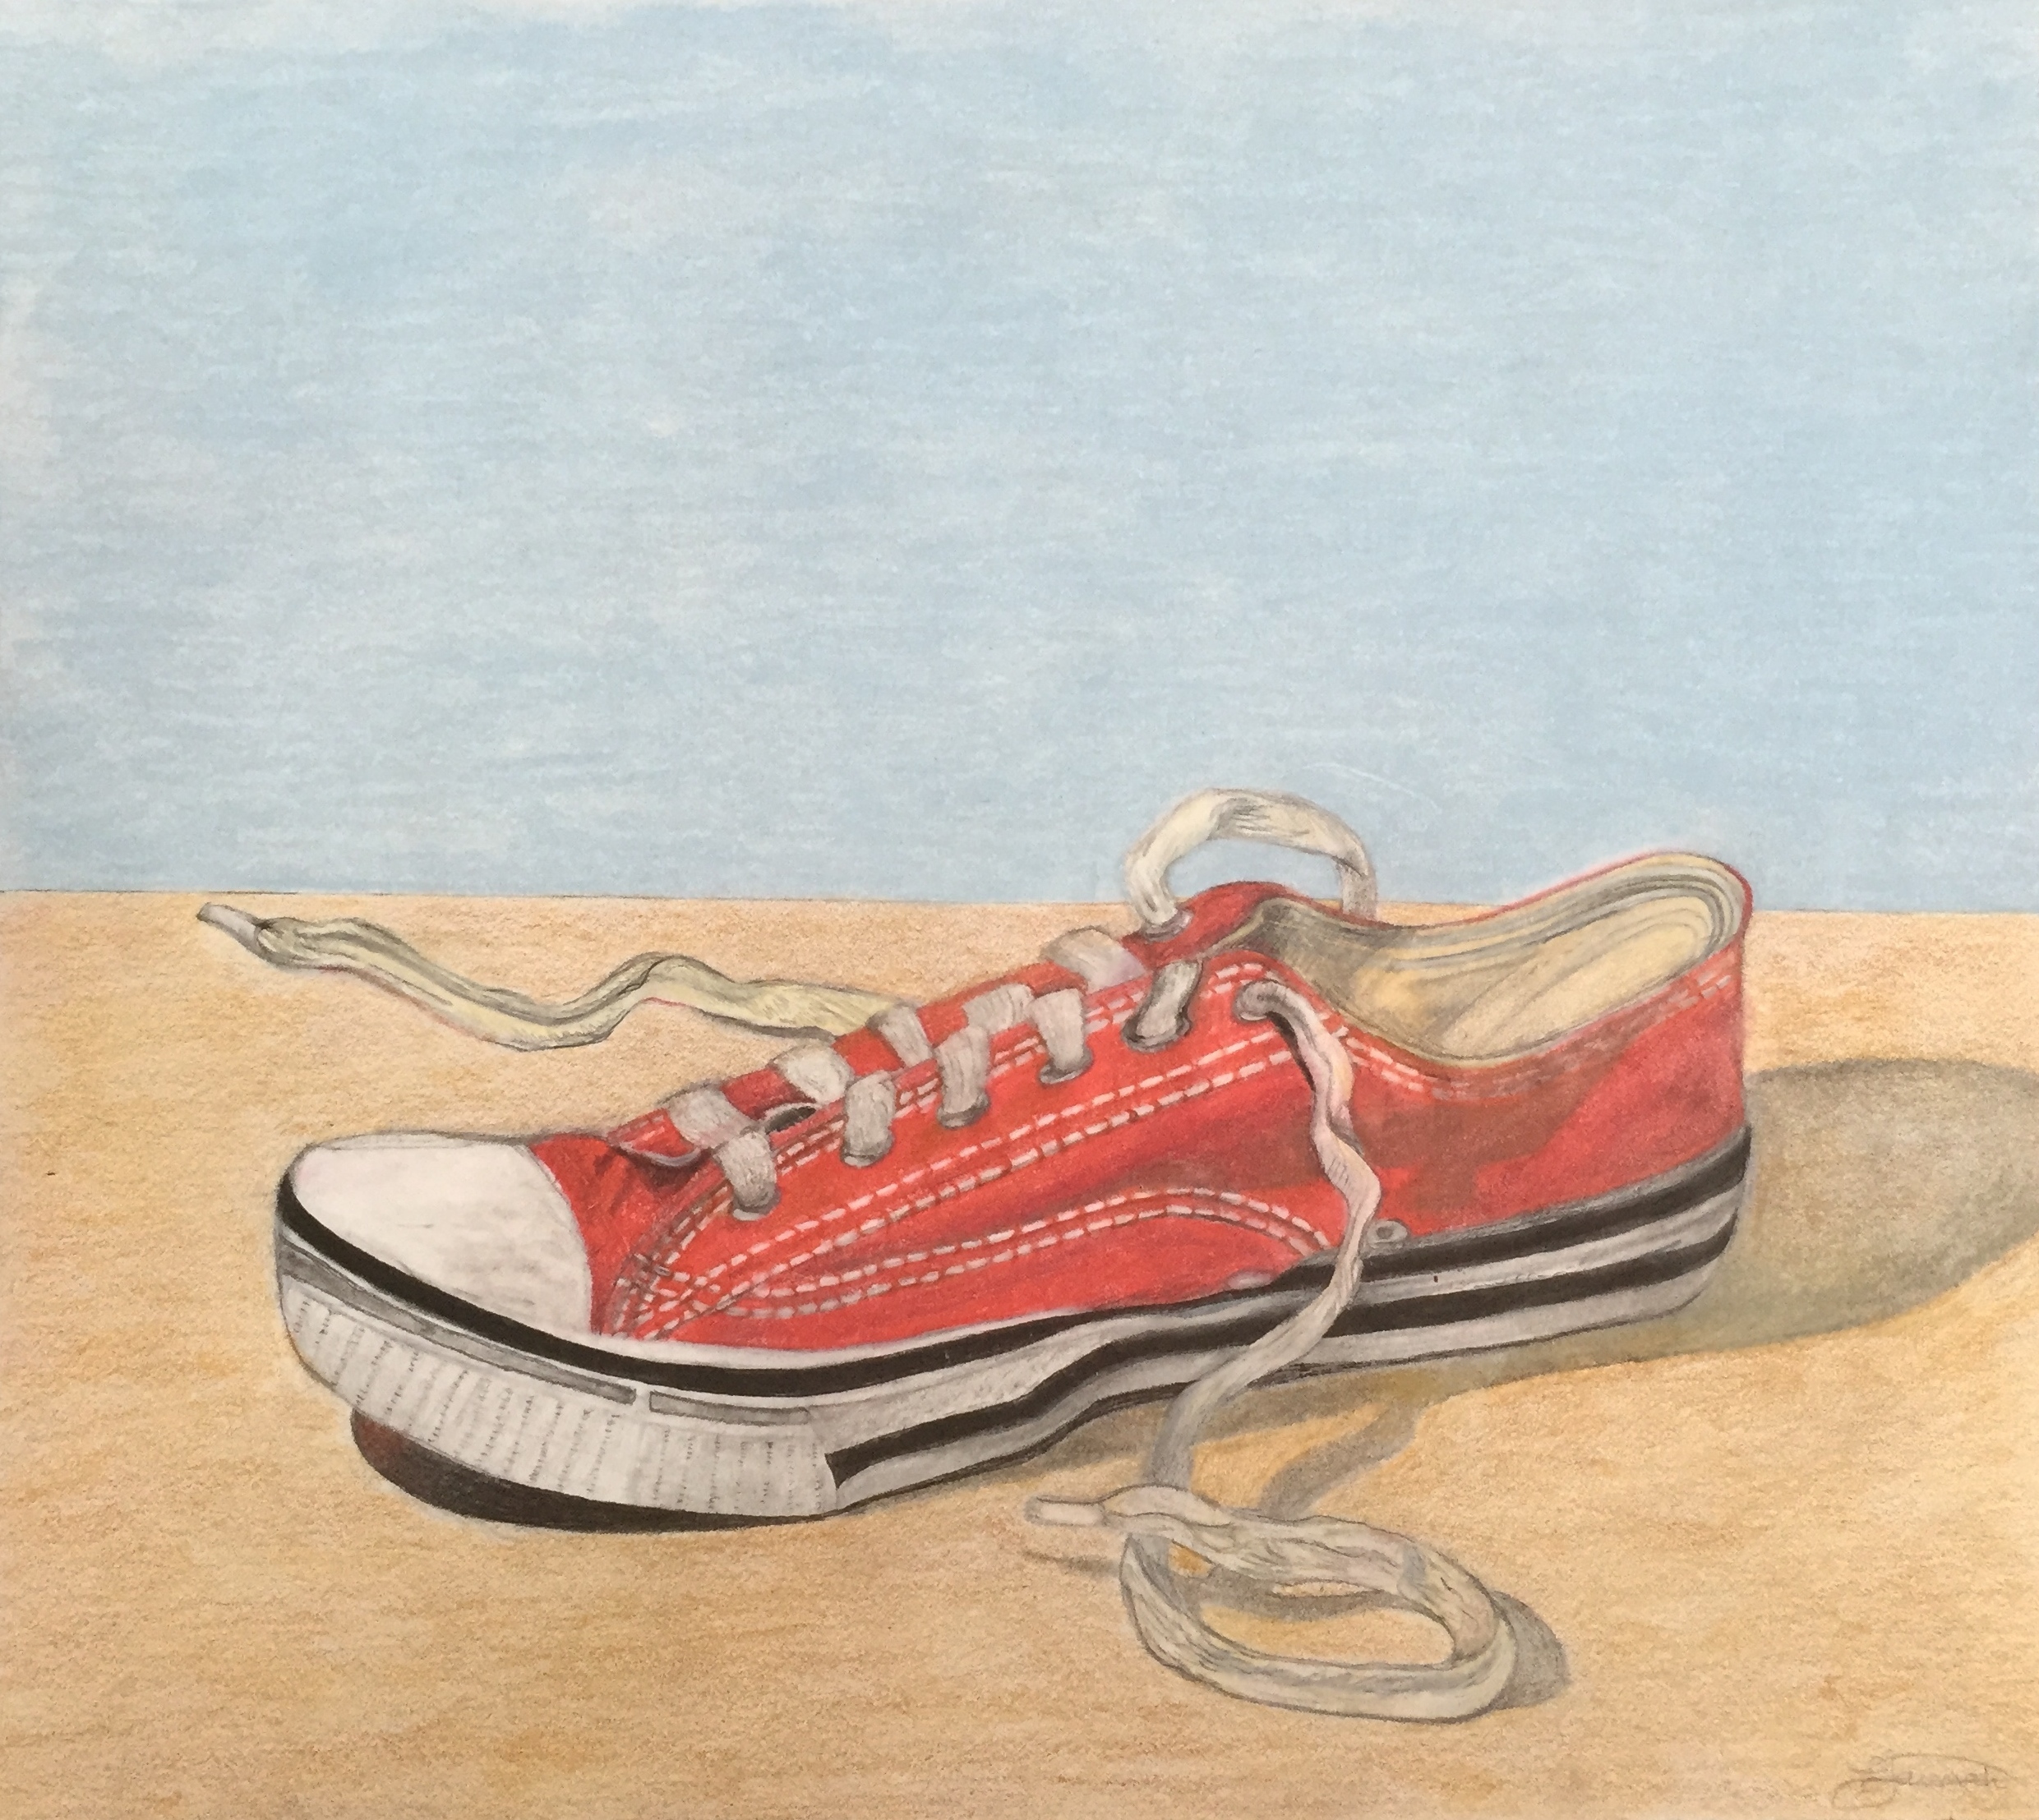 View Image Details Hannah - Sneaker in colored pencil